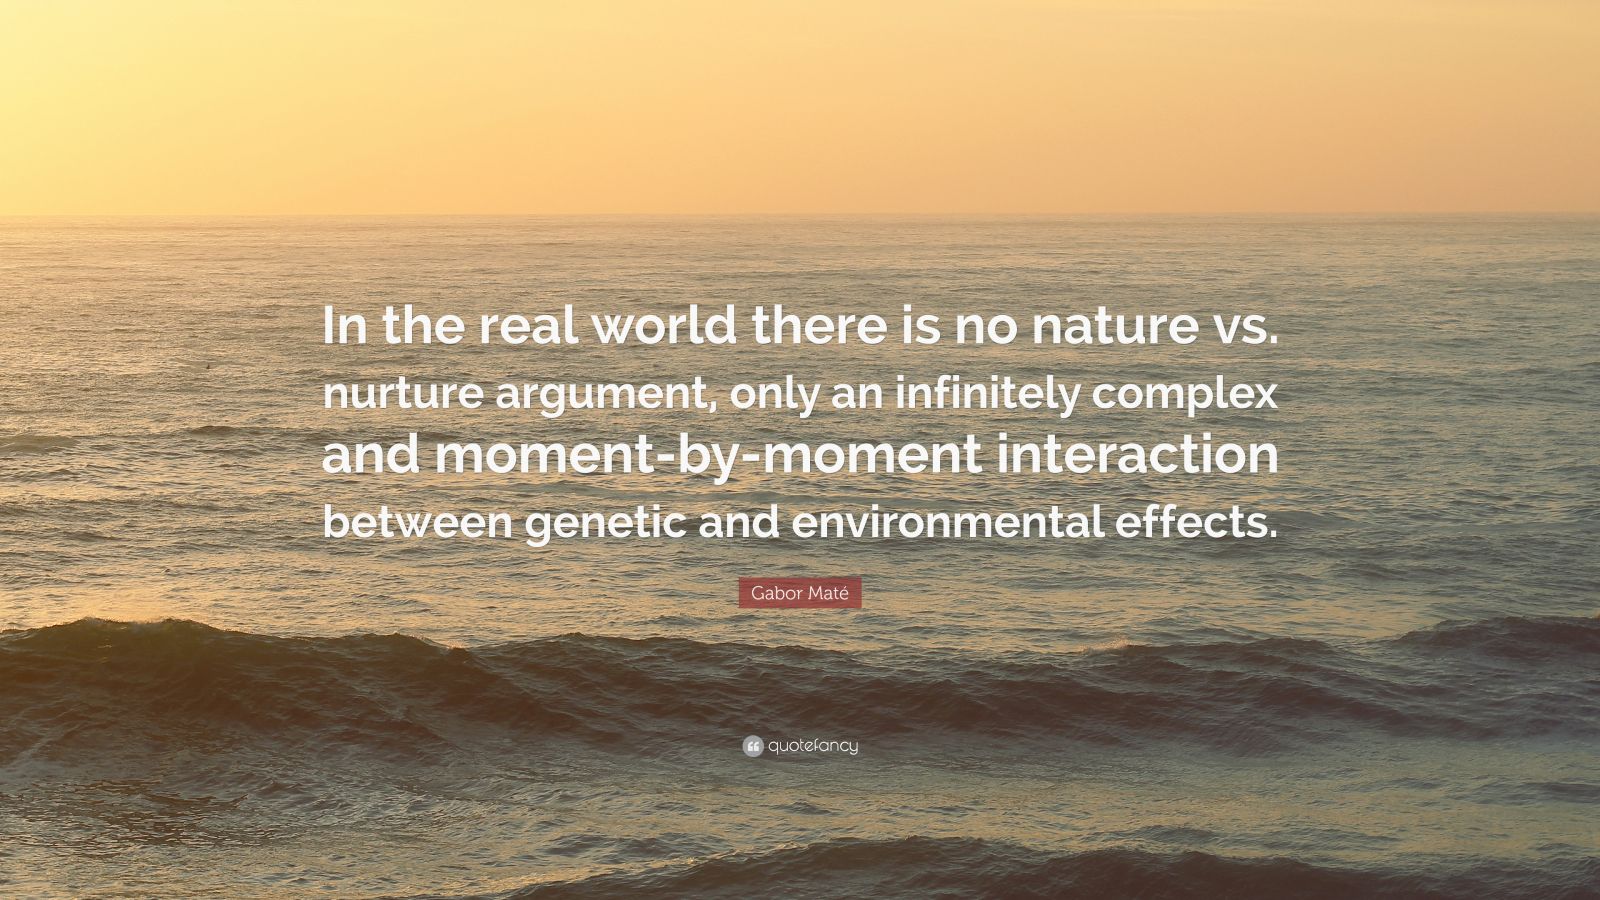 Gabor Maté Quote “In the real world there is no nature vs